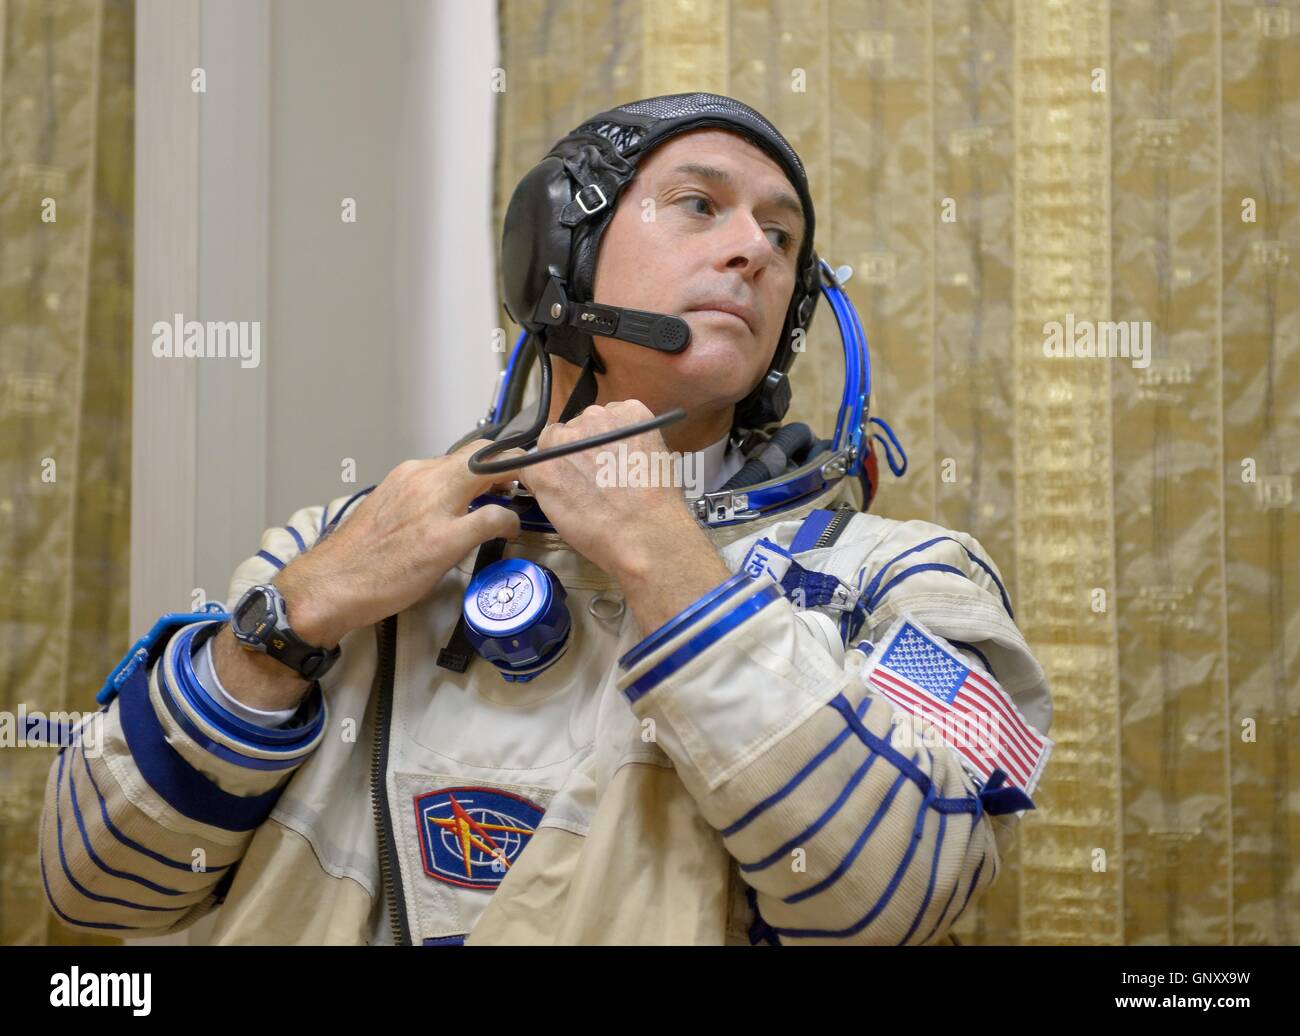 International Space Station Expedition 49-50 prime crew American astronaut Shane Kimbrough dresses in his Sokol spacesuit in preparation for the Soyuz qualification exams at the Gagarin Cosmonaut Training Center August 31, 2016 at Star City, Russia. Stock Photo